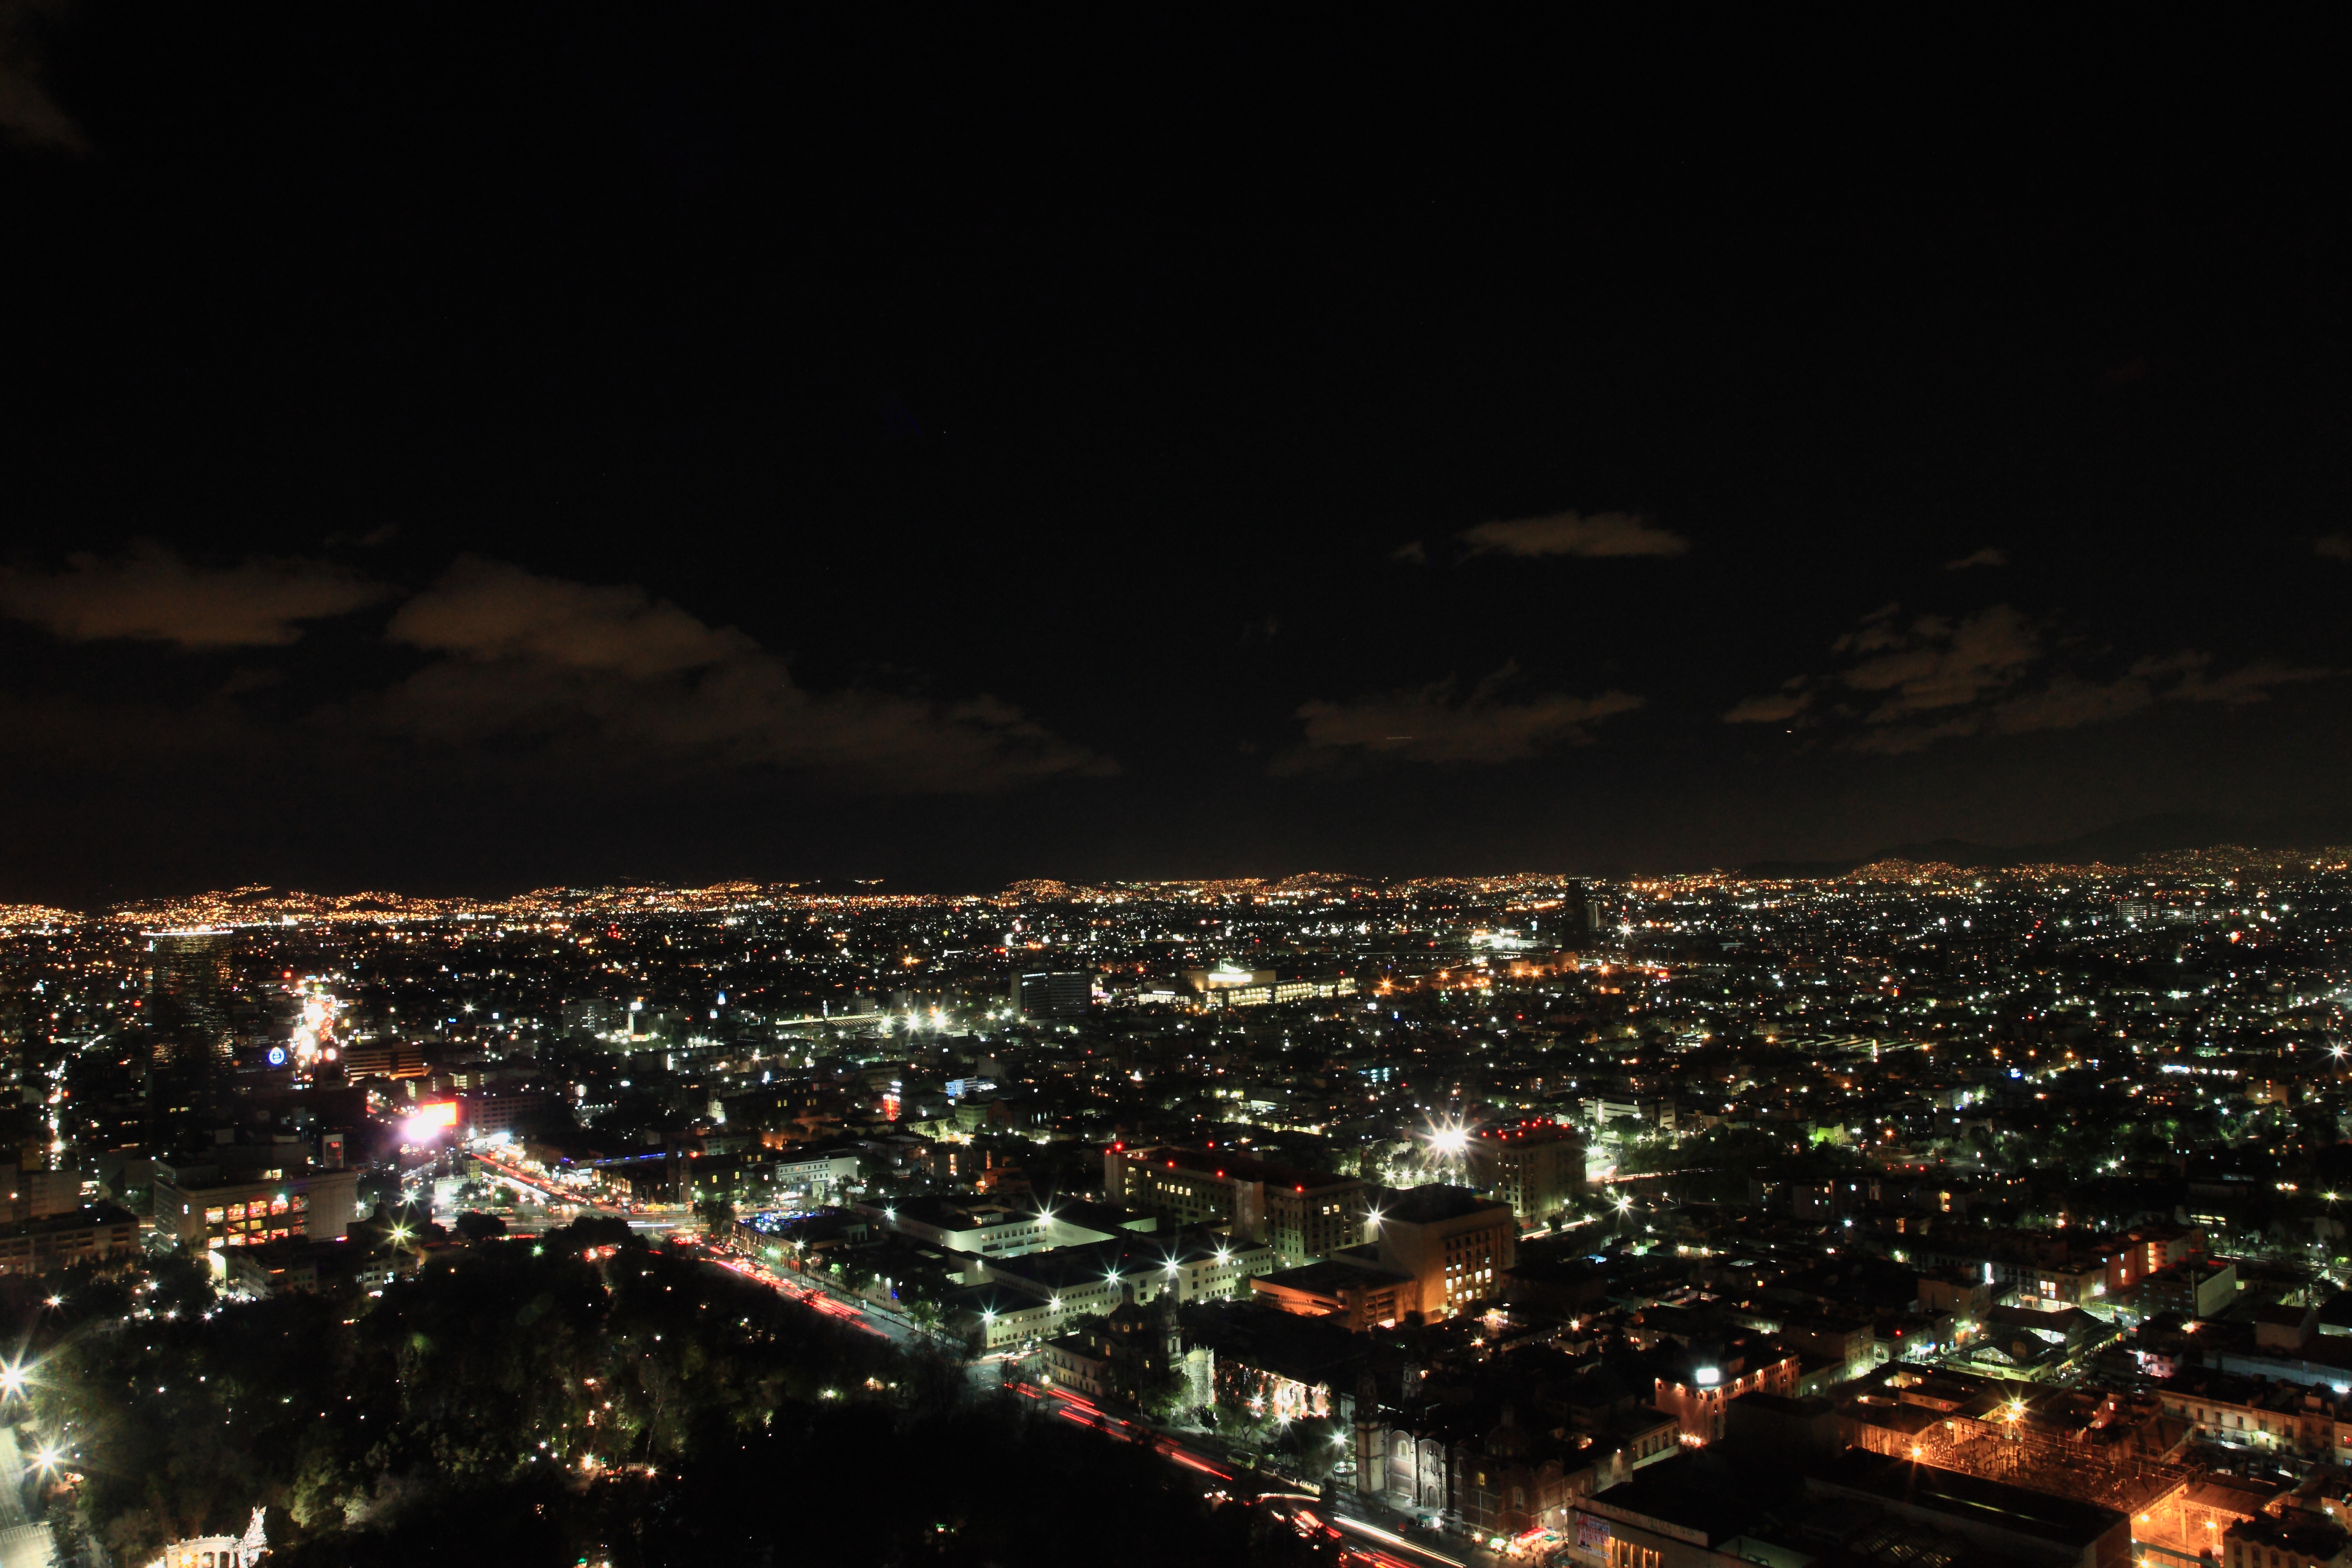 city lights, mexico, view from above, dark, night city